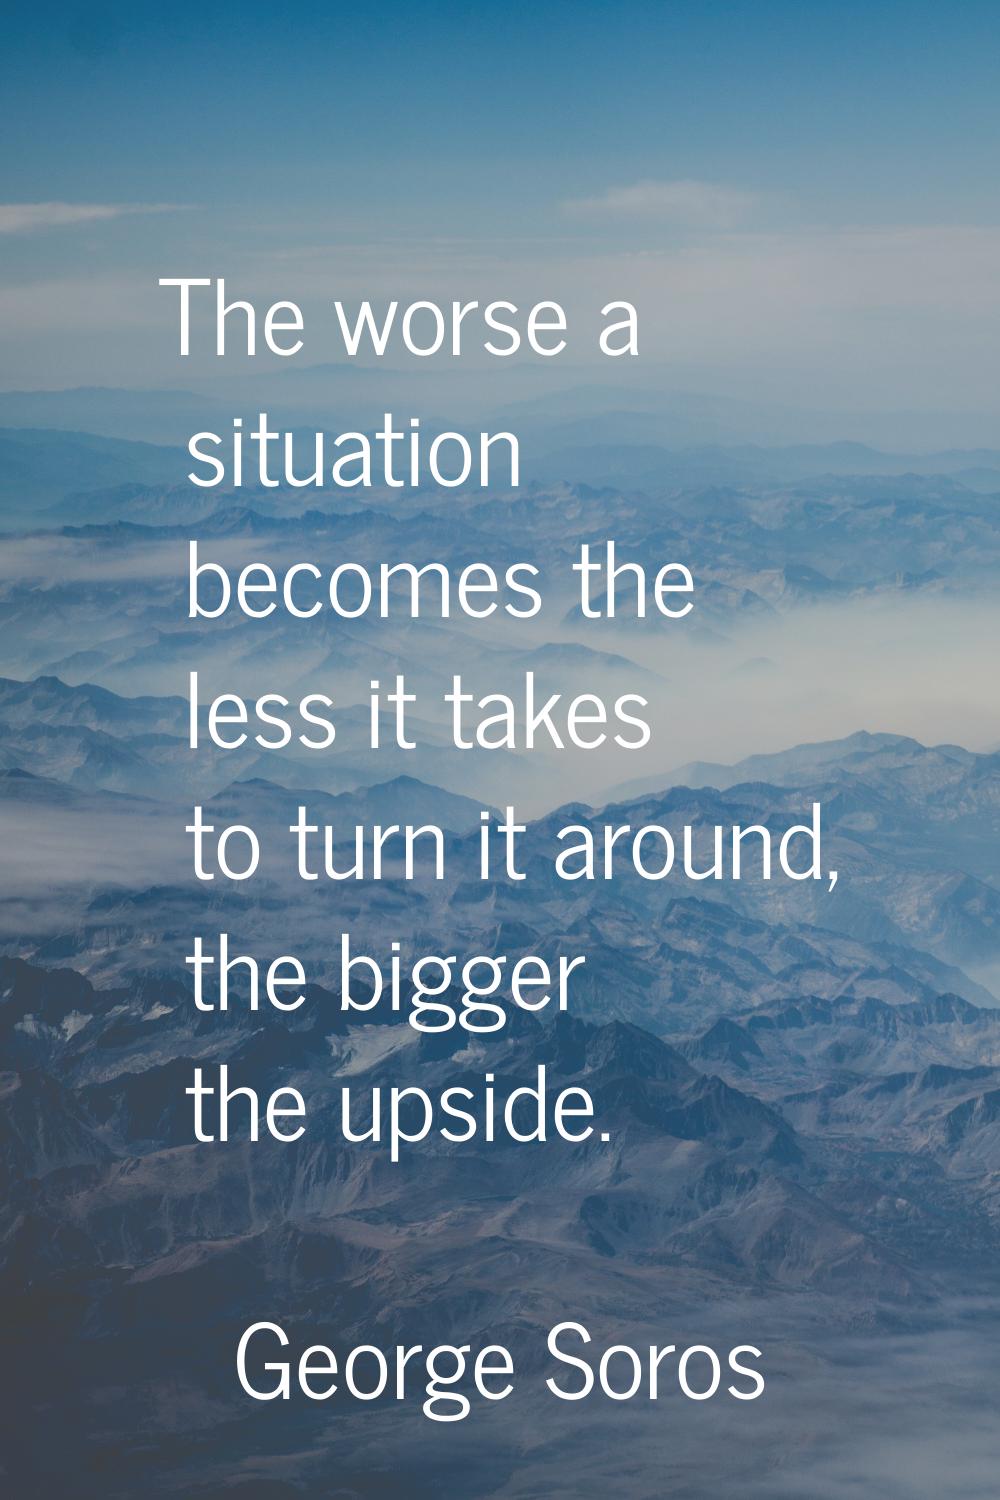 The worse a situation becomes the less it takes to turn it around, the bigger the upside.